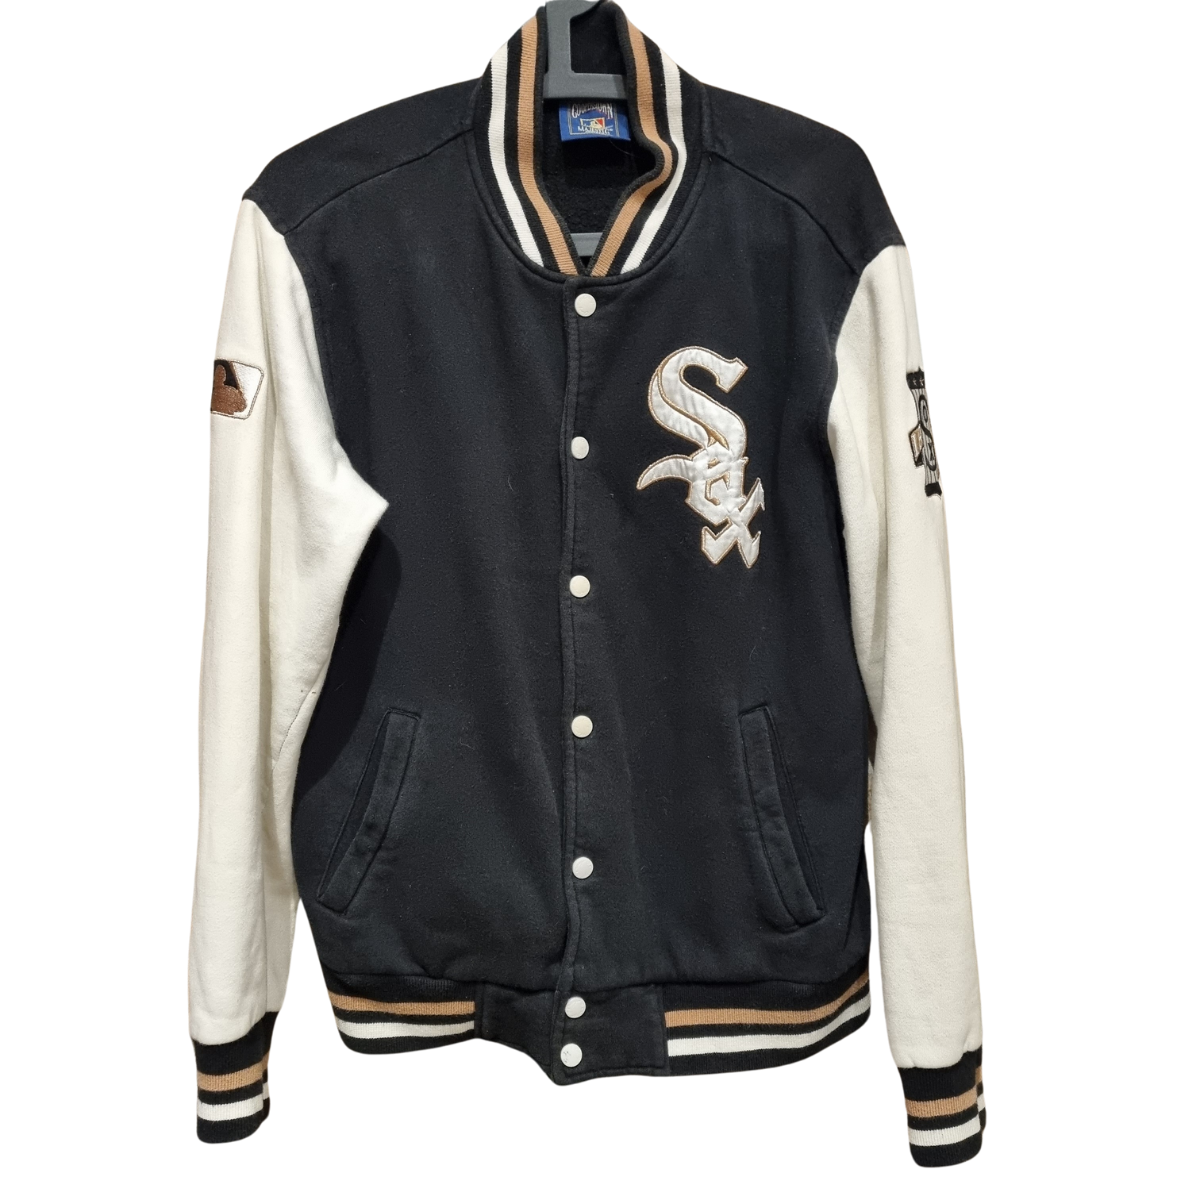 vintage jacket '00 by Majestic Chicago Sox MLB